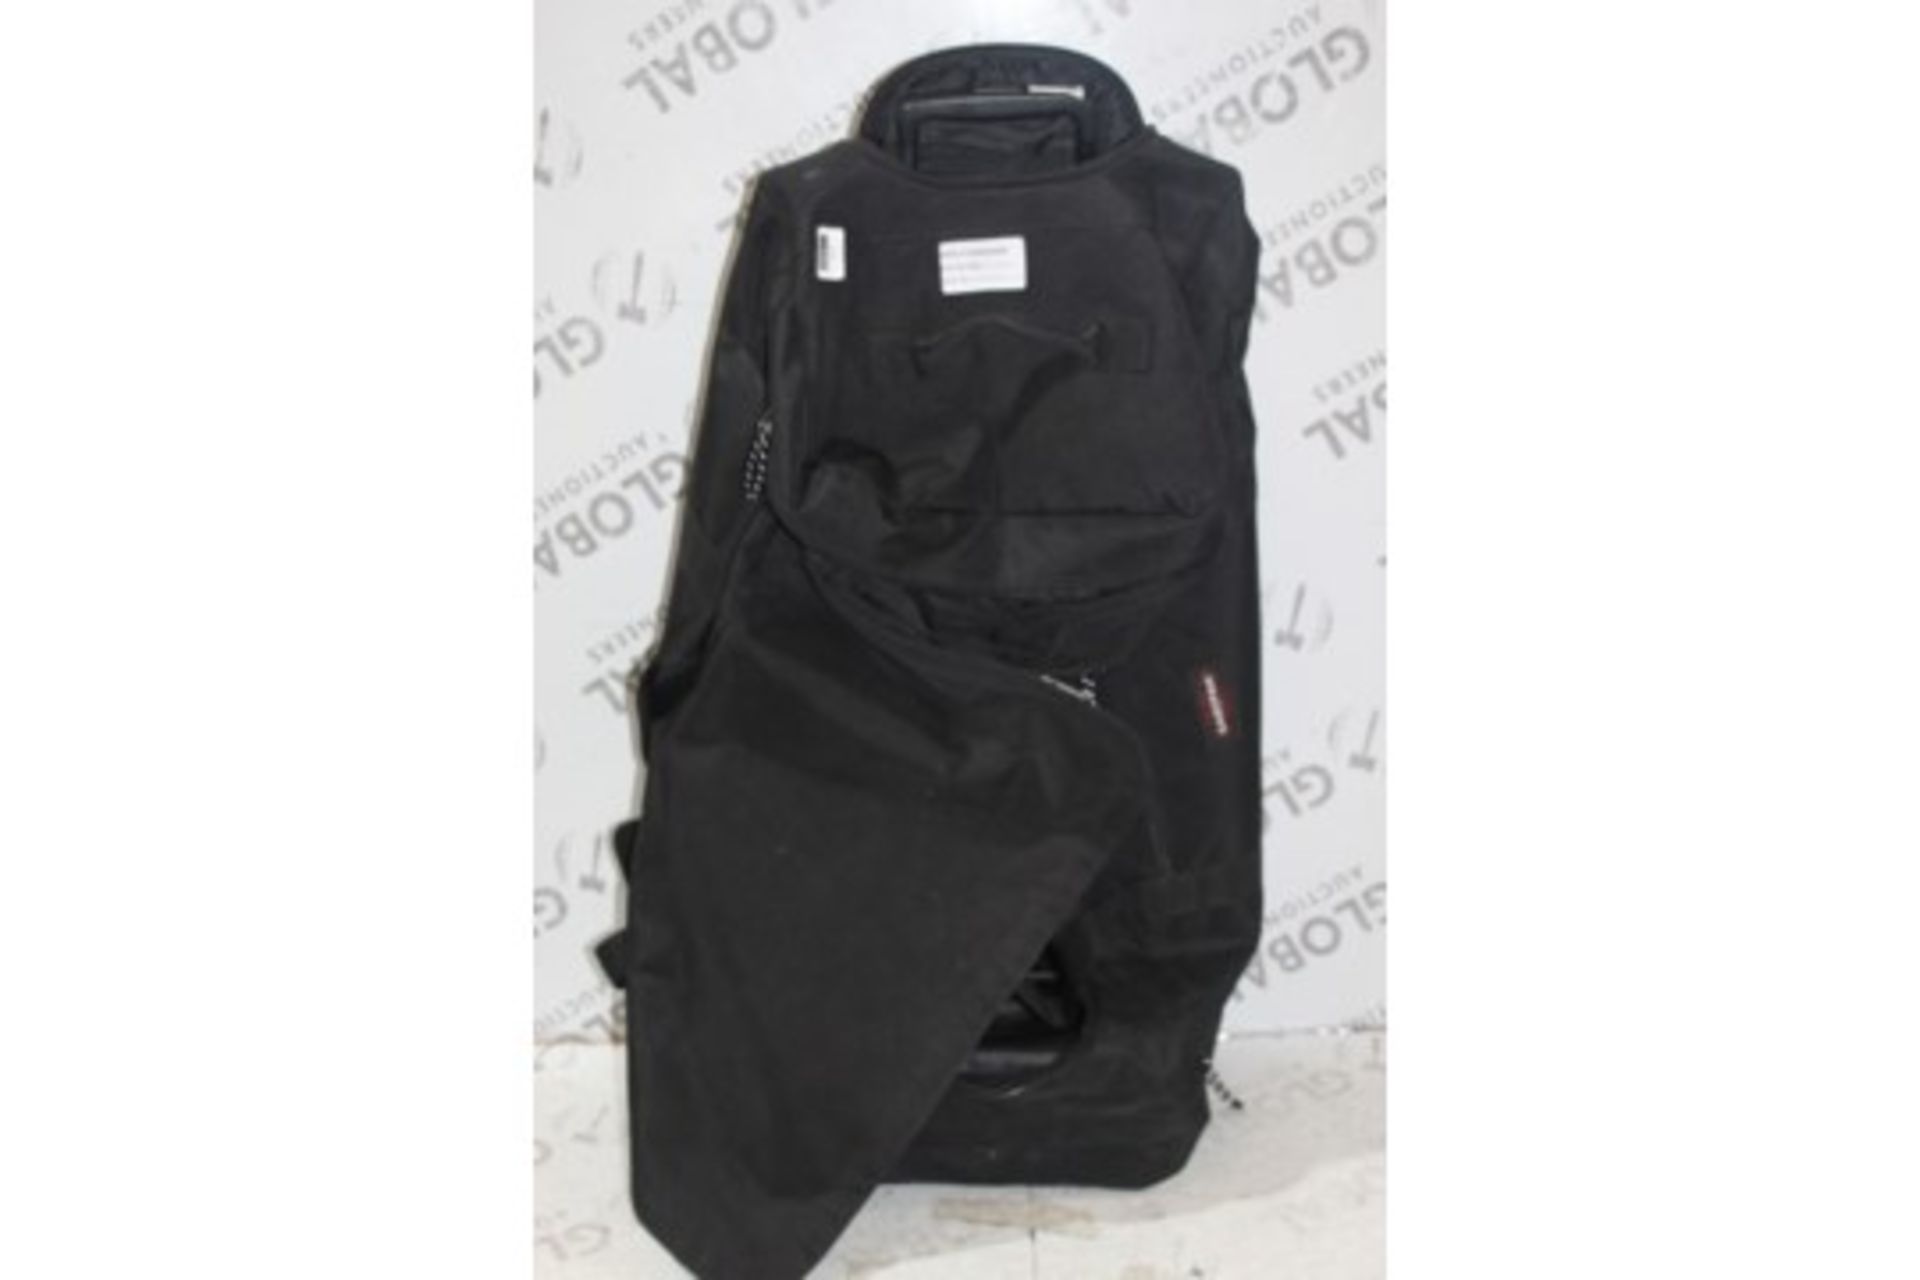 Large East Pack Soft Shell Duffle Bag RRP £70 RET00824784) (Appraisals Available Upon Request)